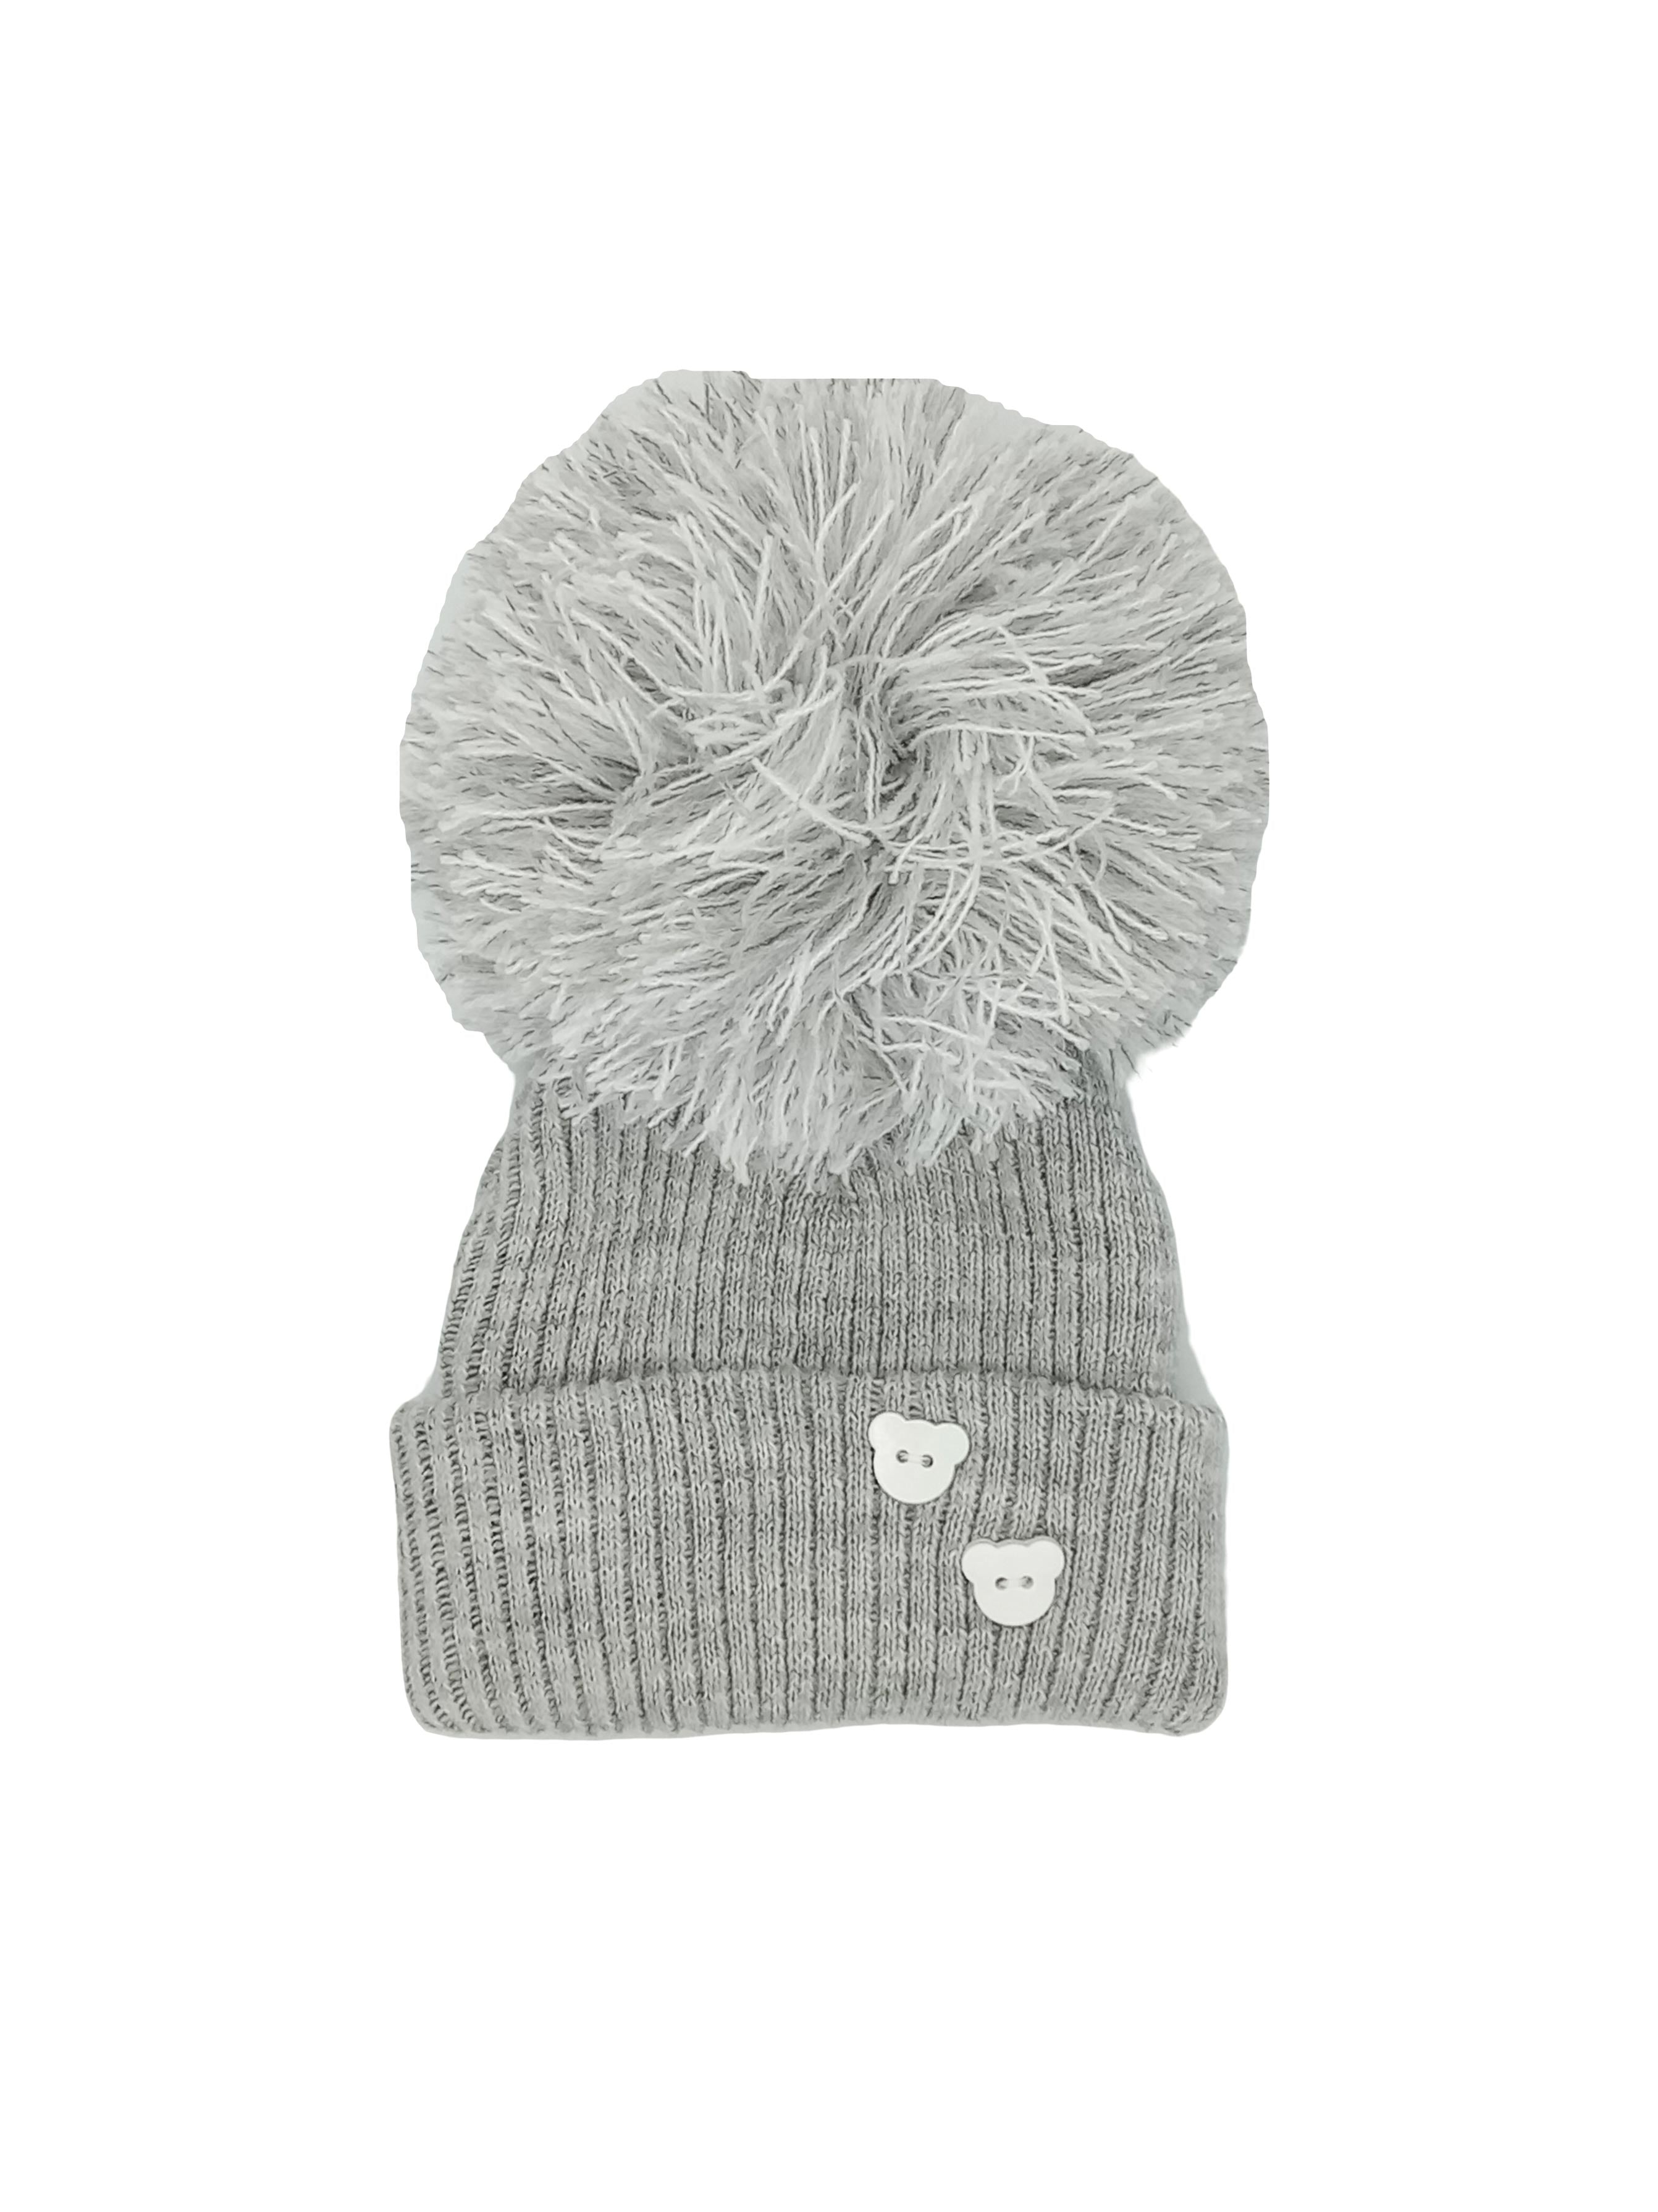 Grey Knitted Pom Pom Hat Hat Little Mouse Baby Clothing and Gifts Ltd 